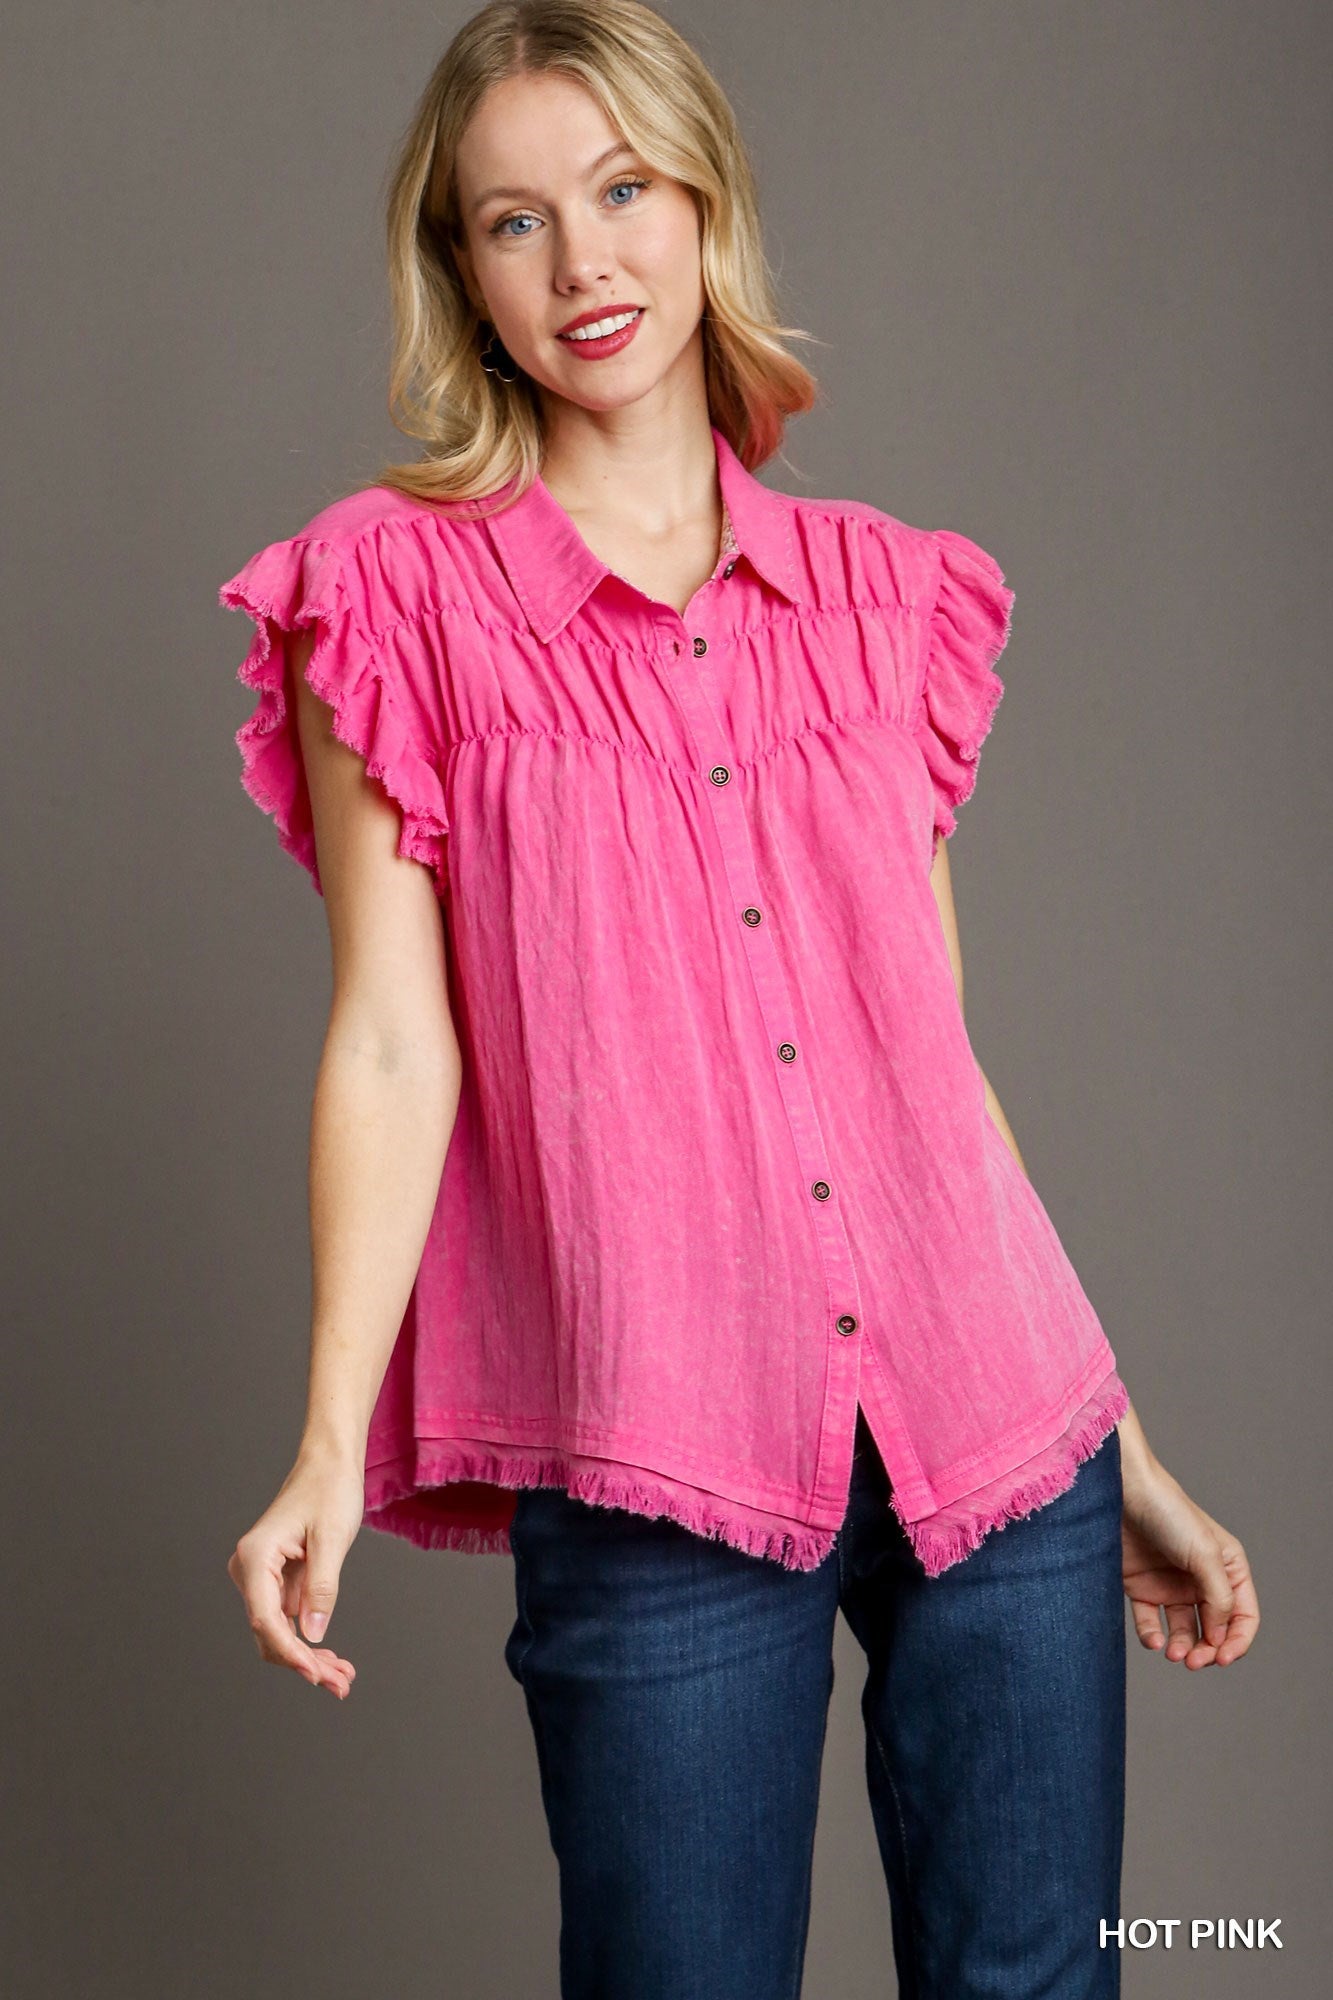 Hot Pink Mineral Wash Button Down Top